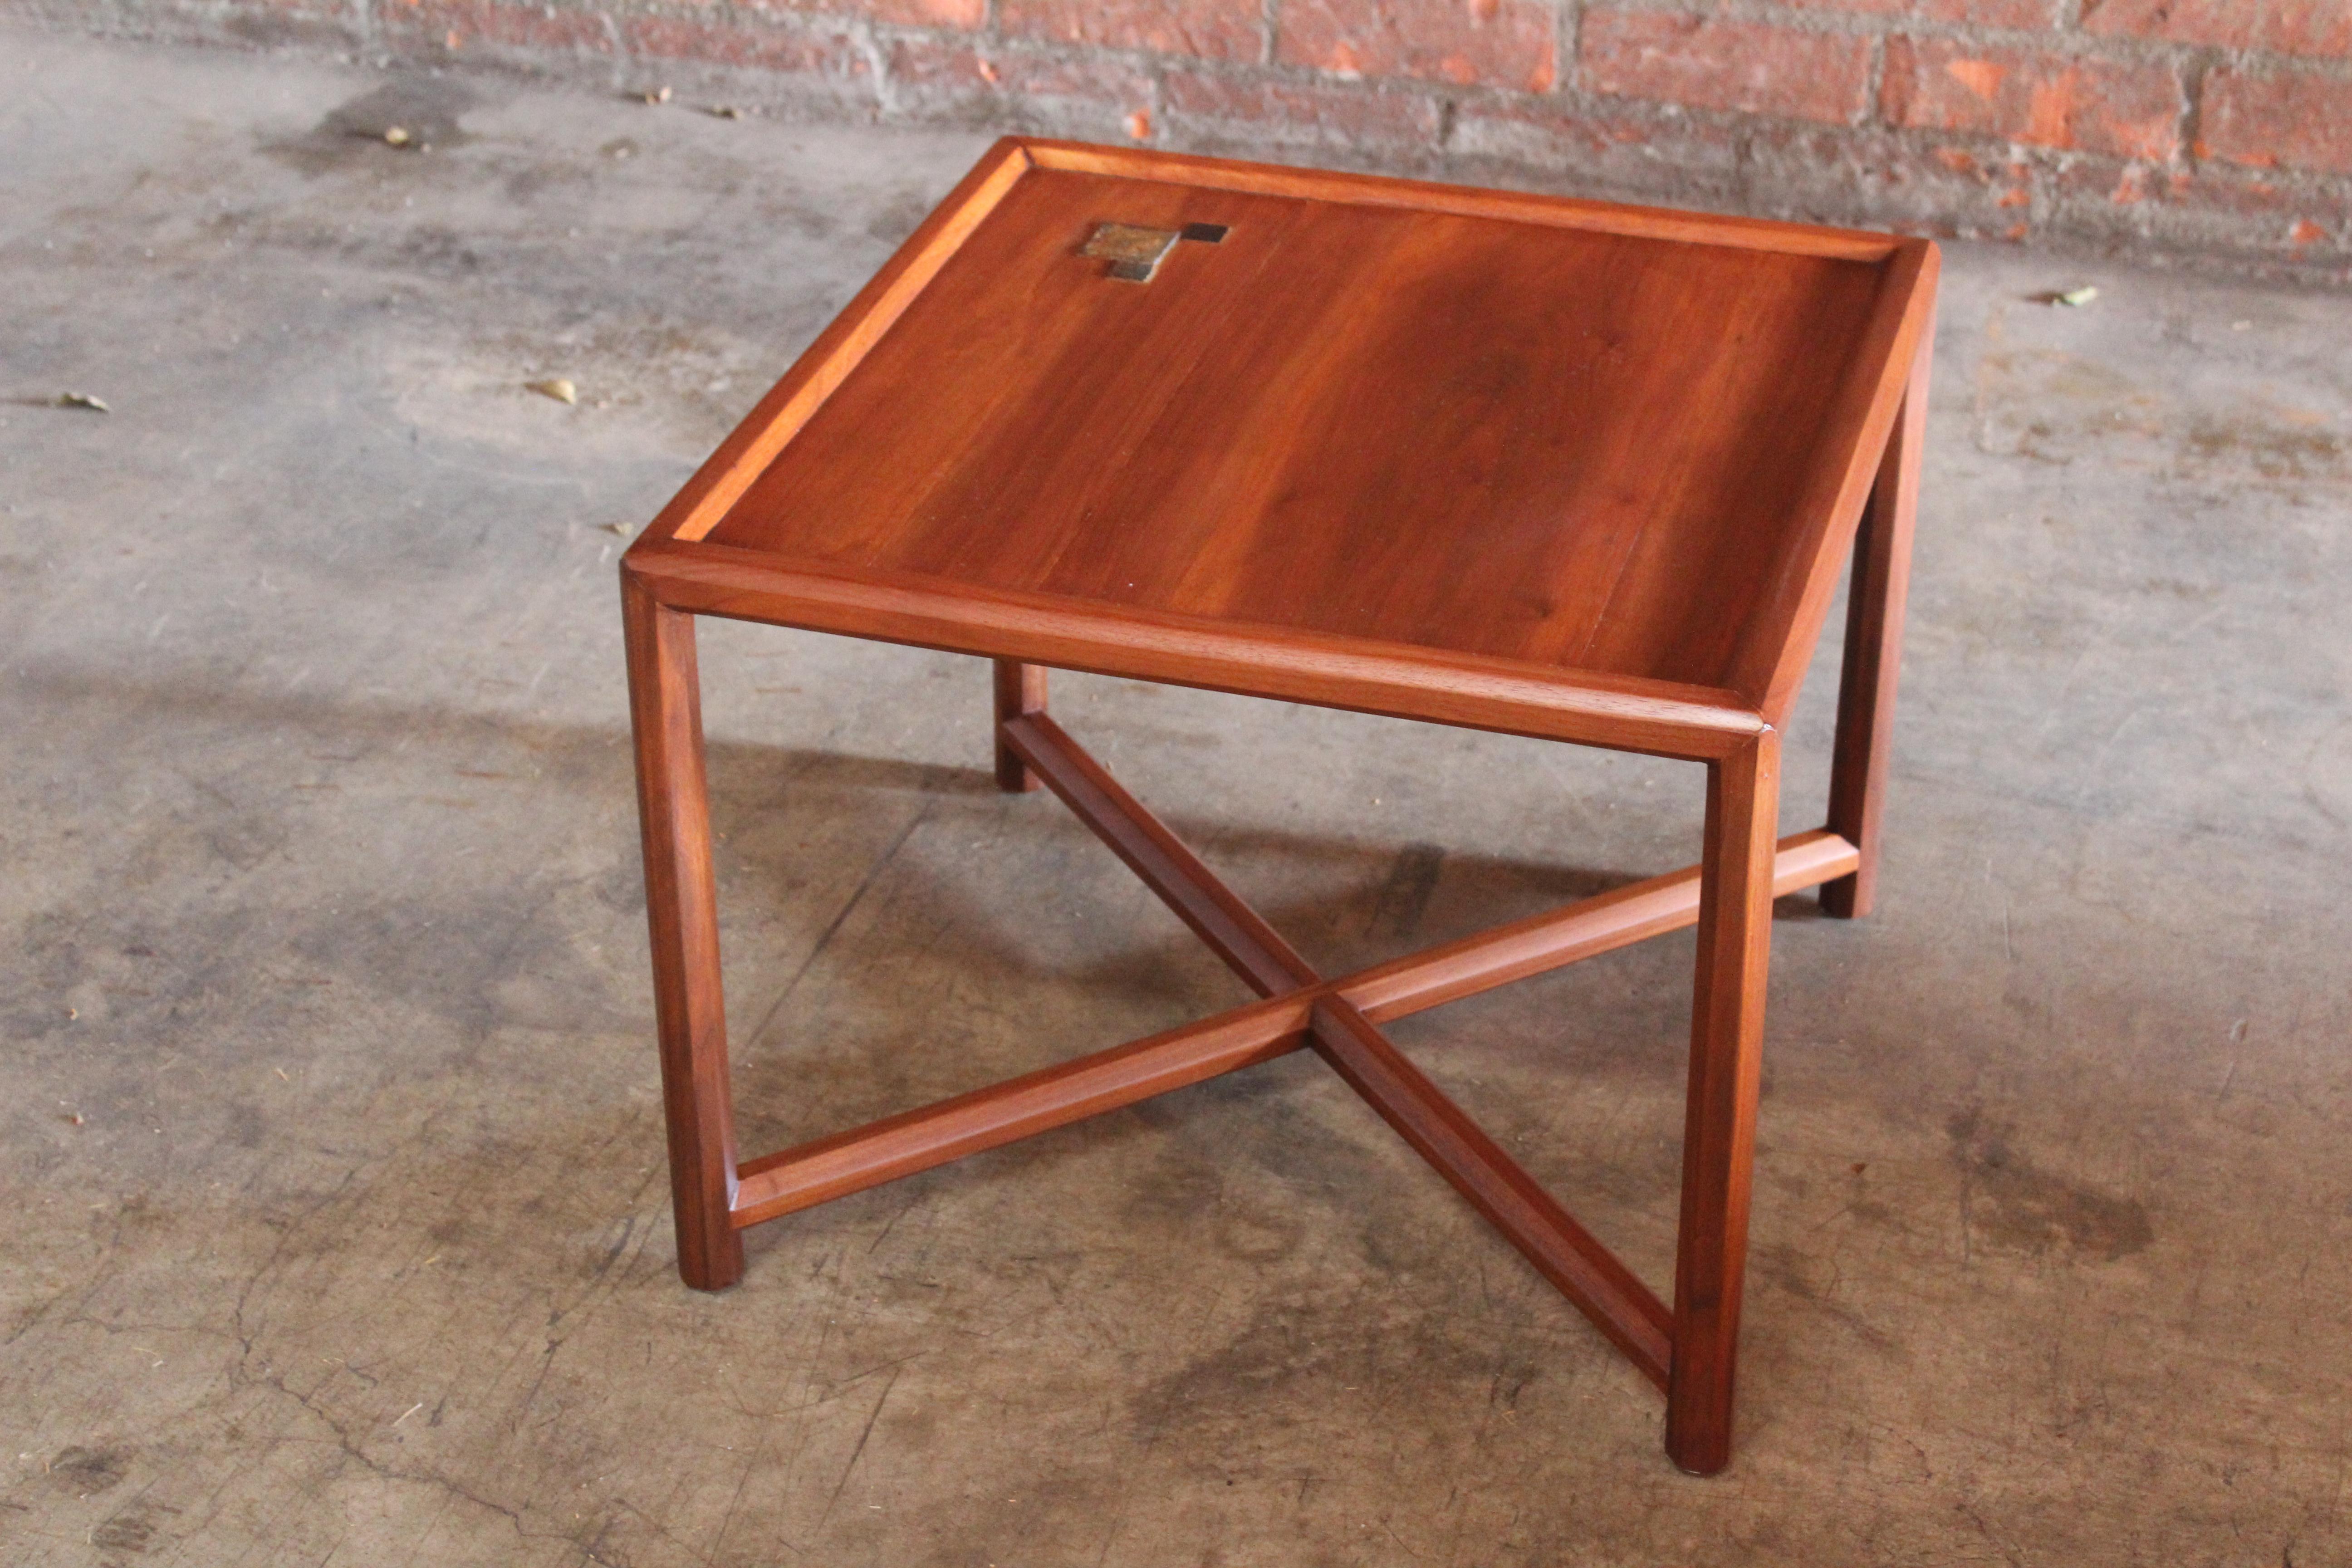 Mid-Century Modern Walnut End Table with Tiffany Tiles by Edward Wormley for Dunbar, 1950s For Sale